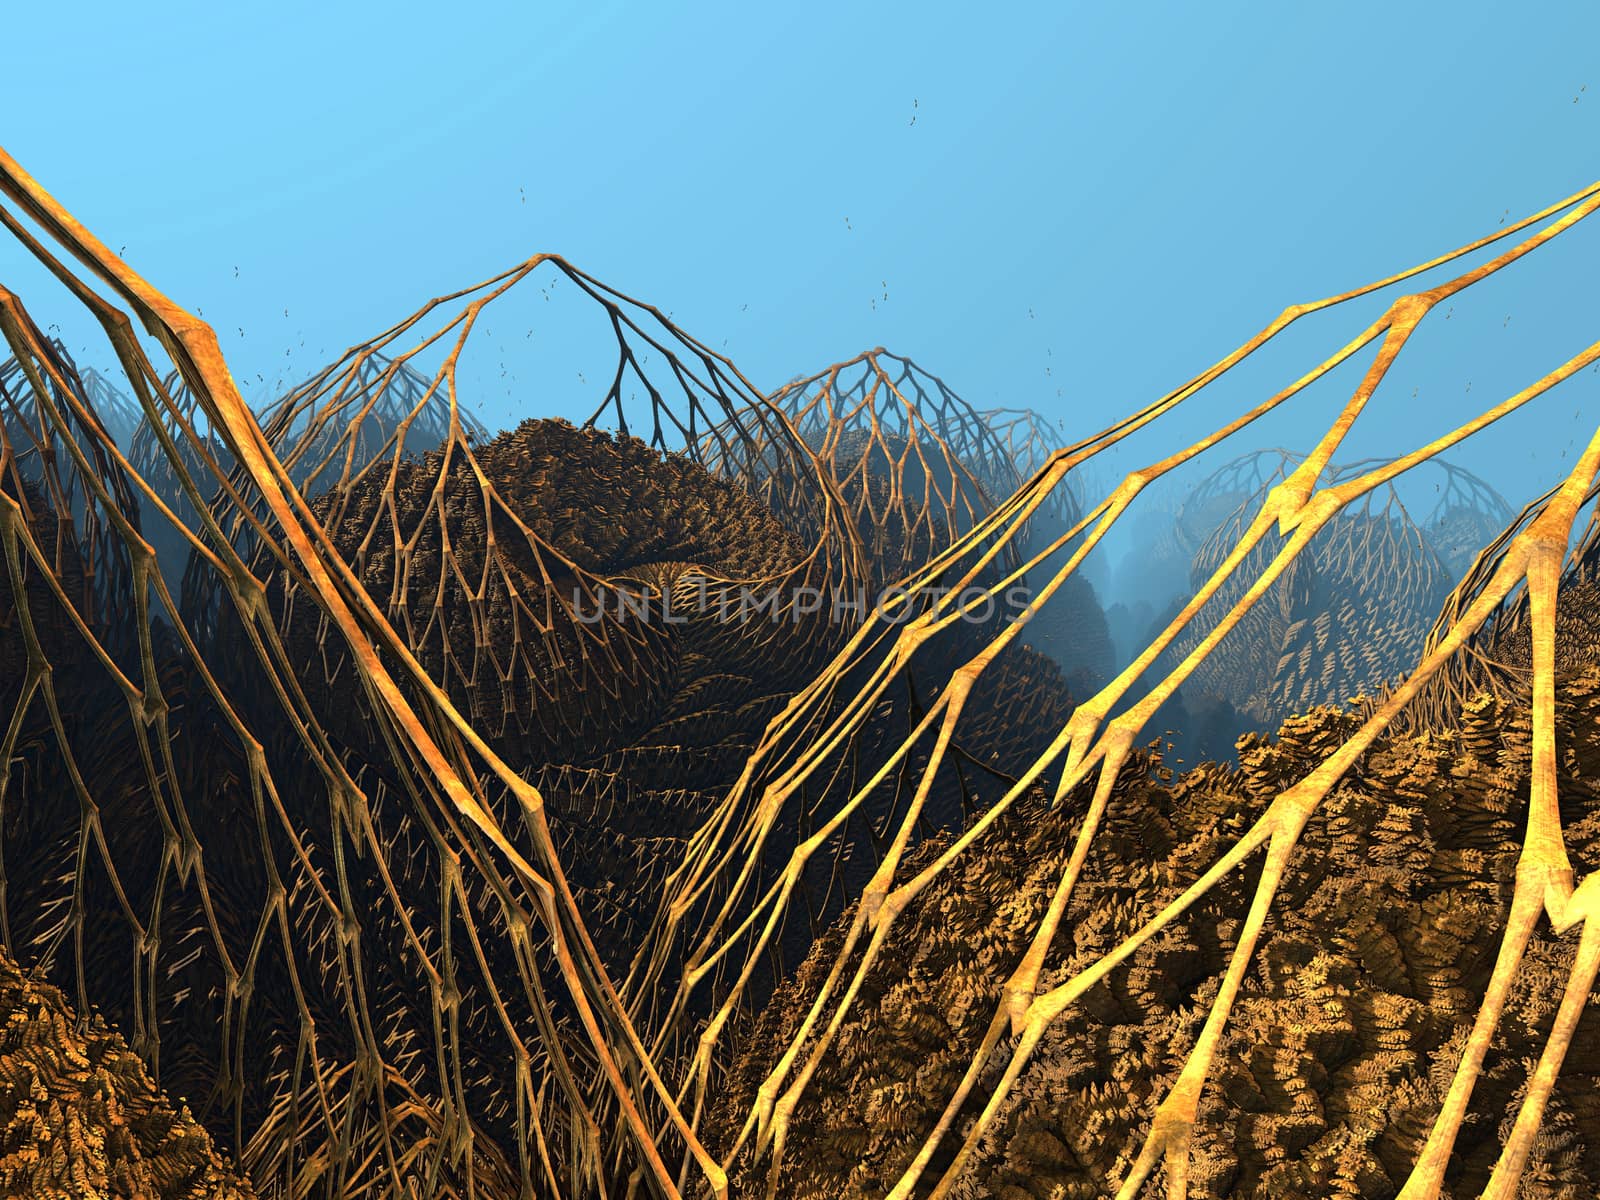 Computer rendered virtual scenery for art and entertainment